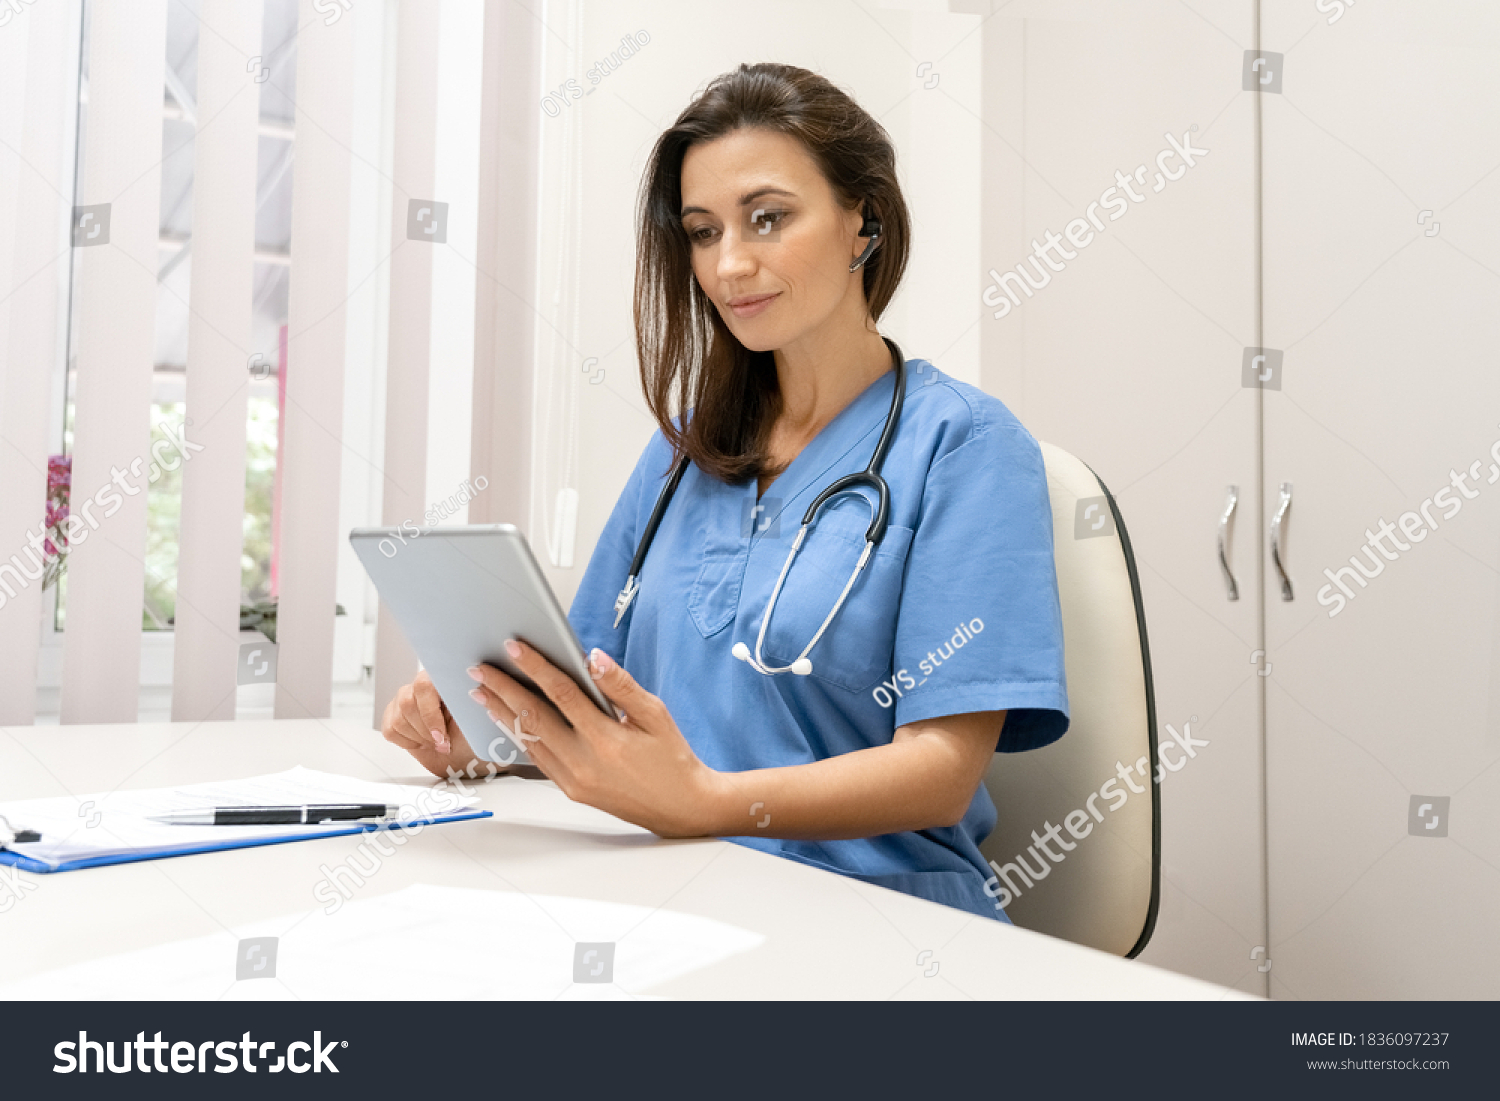 Telemedicine, Medical online, e health concept. Doctor video chat , explaining with patient via tablet computer, mobile health application. Doctor teleconferencing with medical team in hospital #1836097237